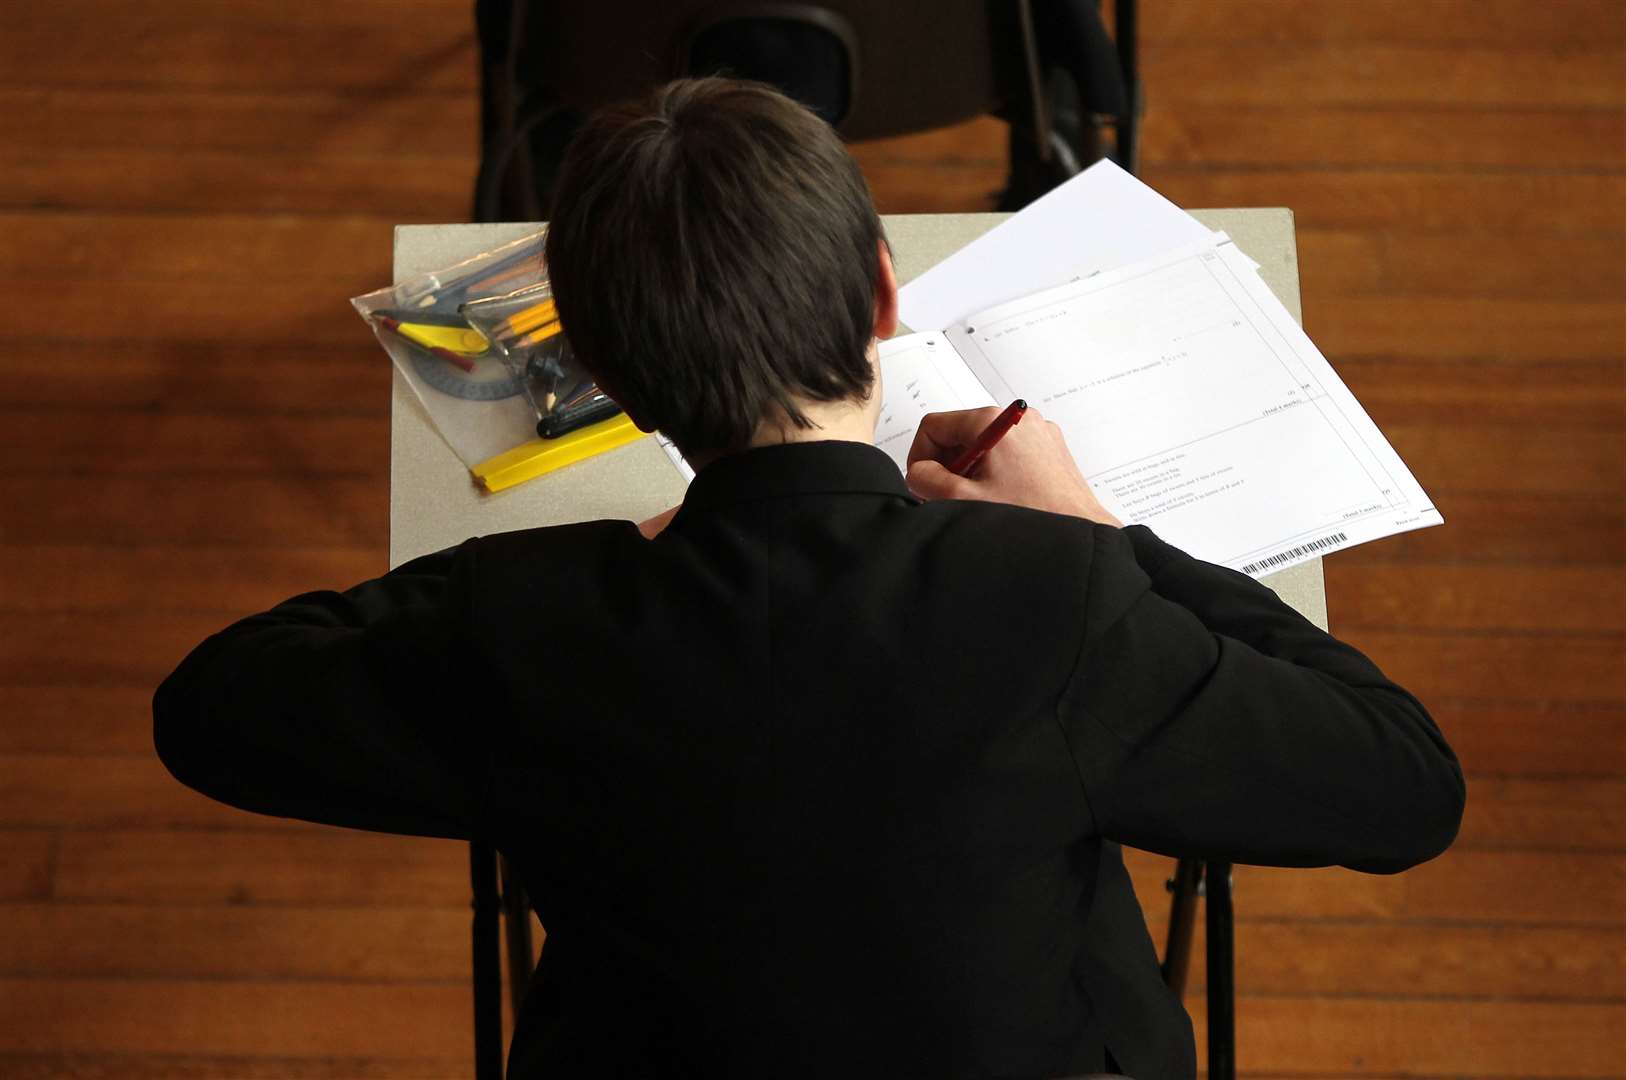 Teenagers have not sat GCSE or A-levels exams for the past two years